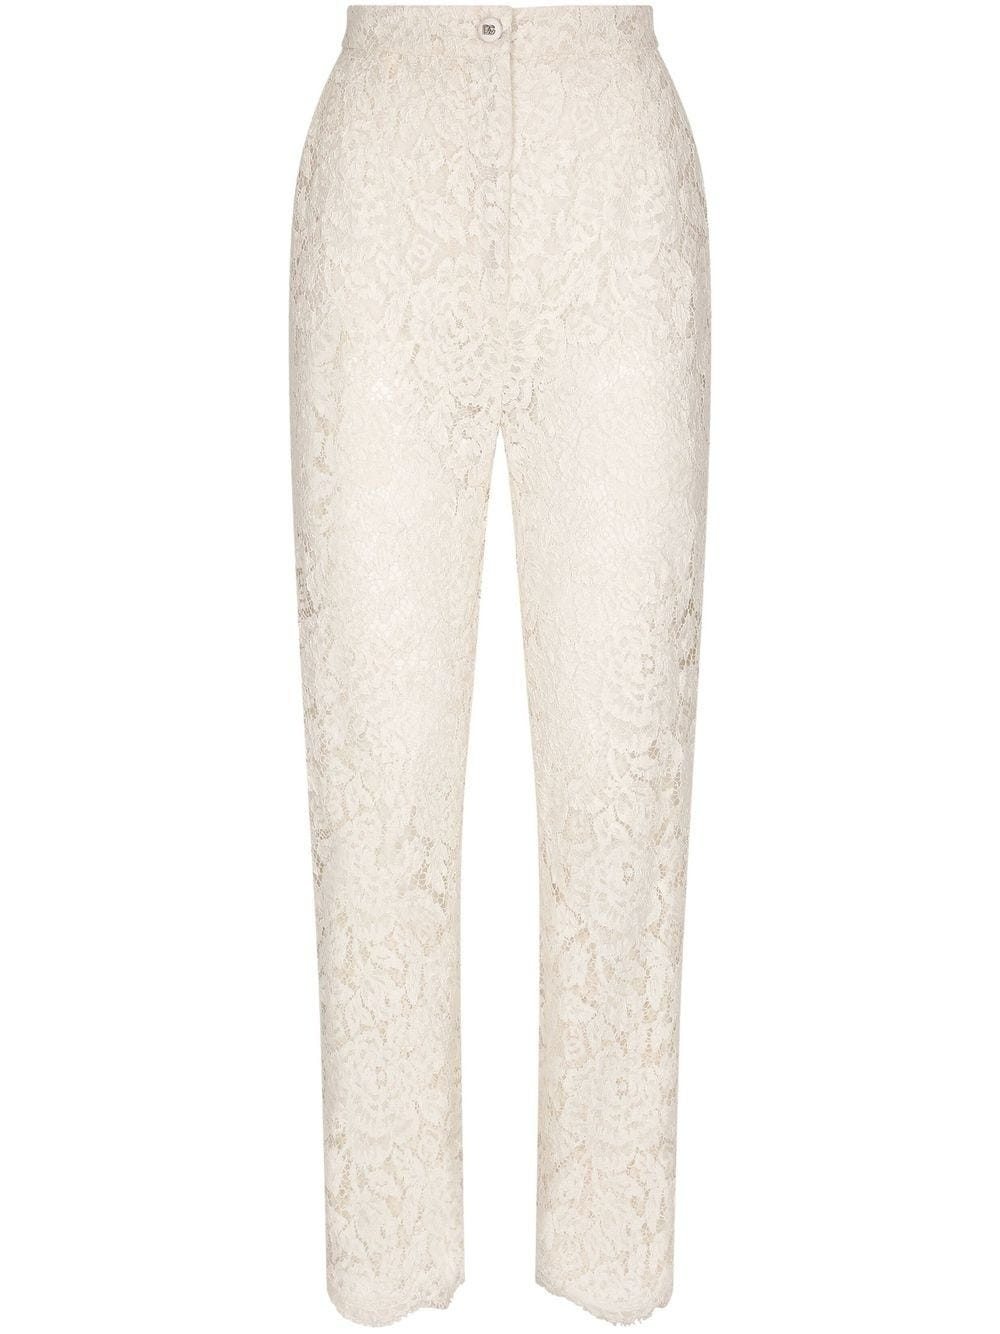 DOLCE & GABBANA WHITE FLORAL LACE TROUSERS